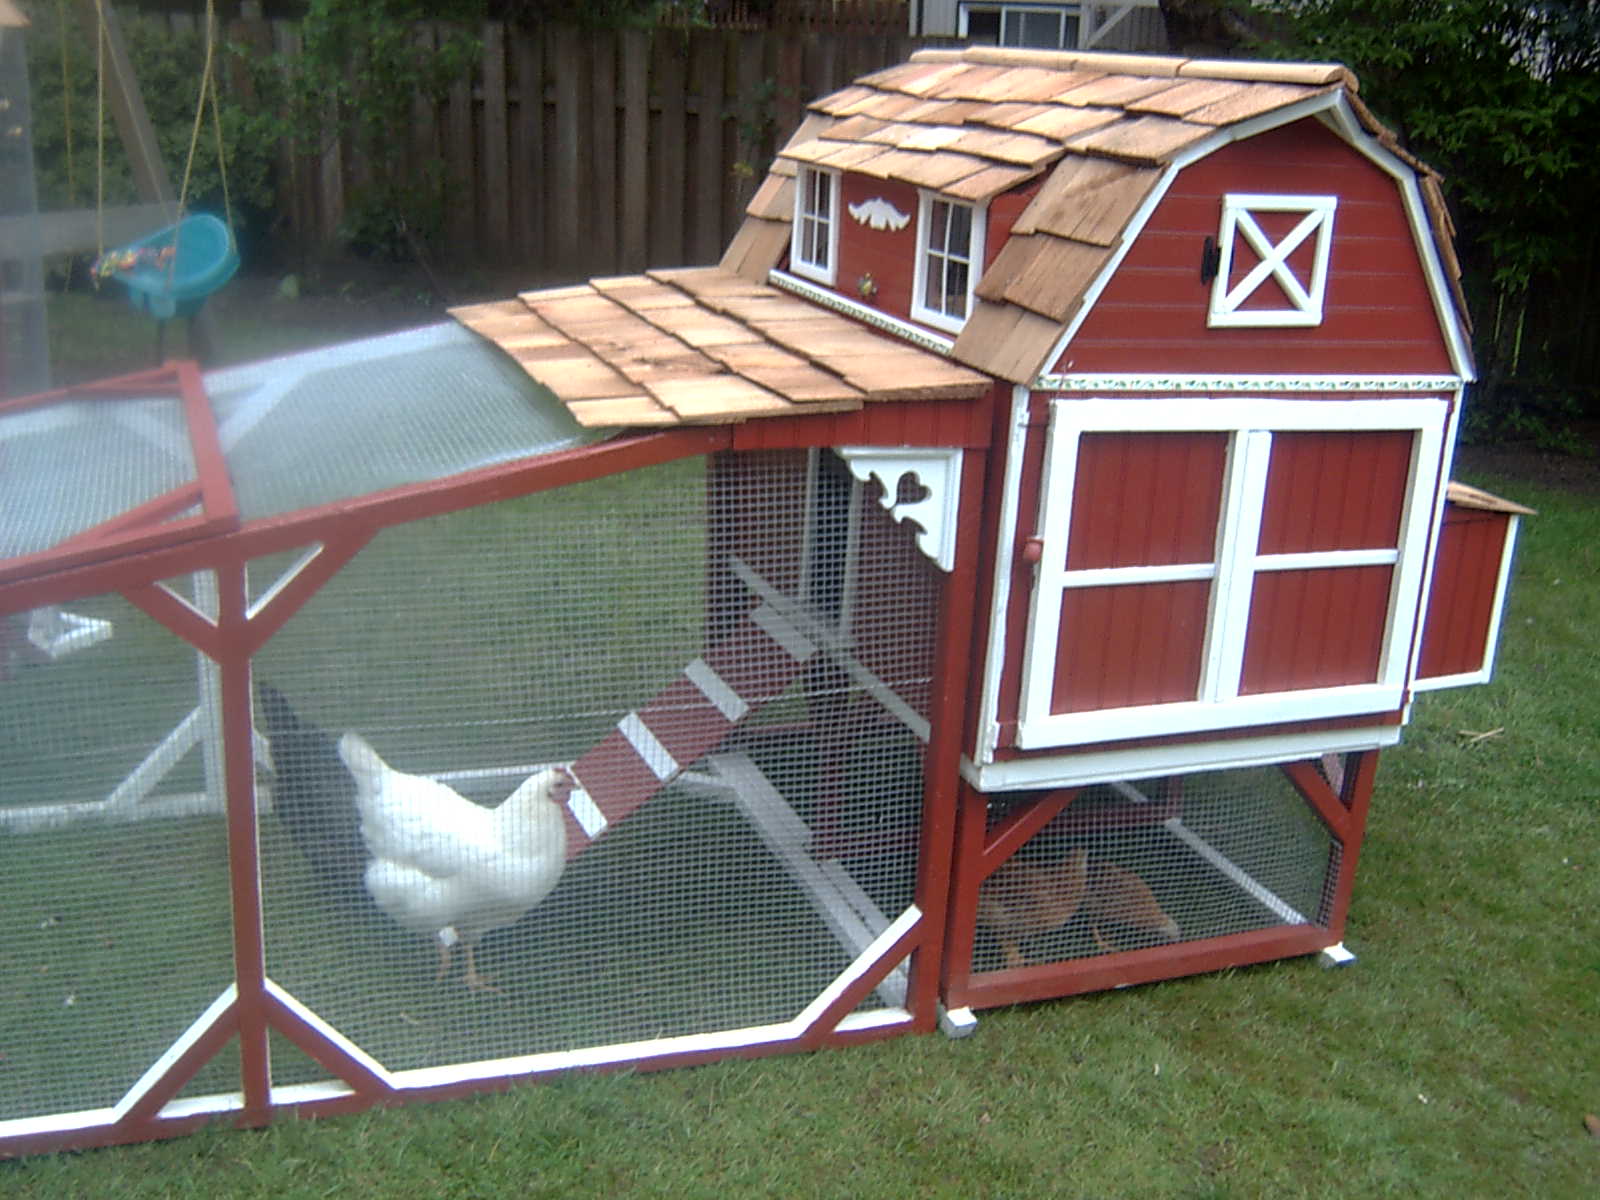 The Beautiful Chicken Farm: What a Beautiful Chicken Coop